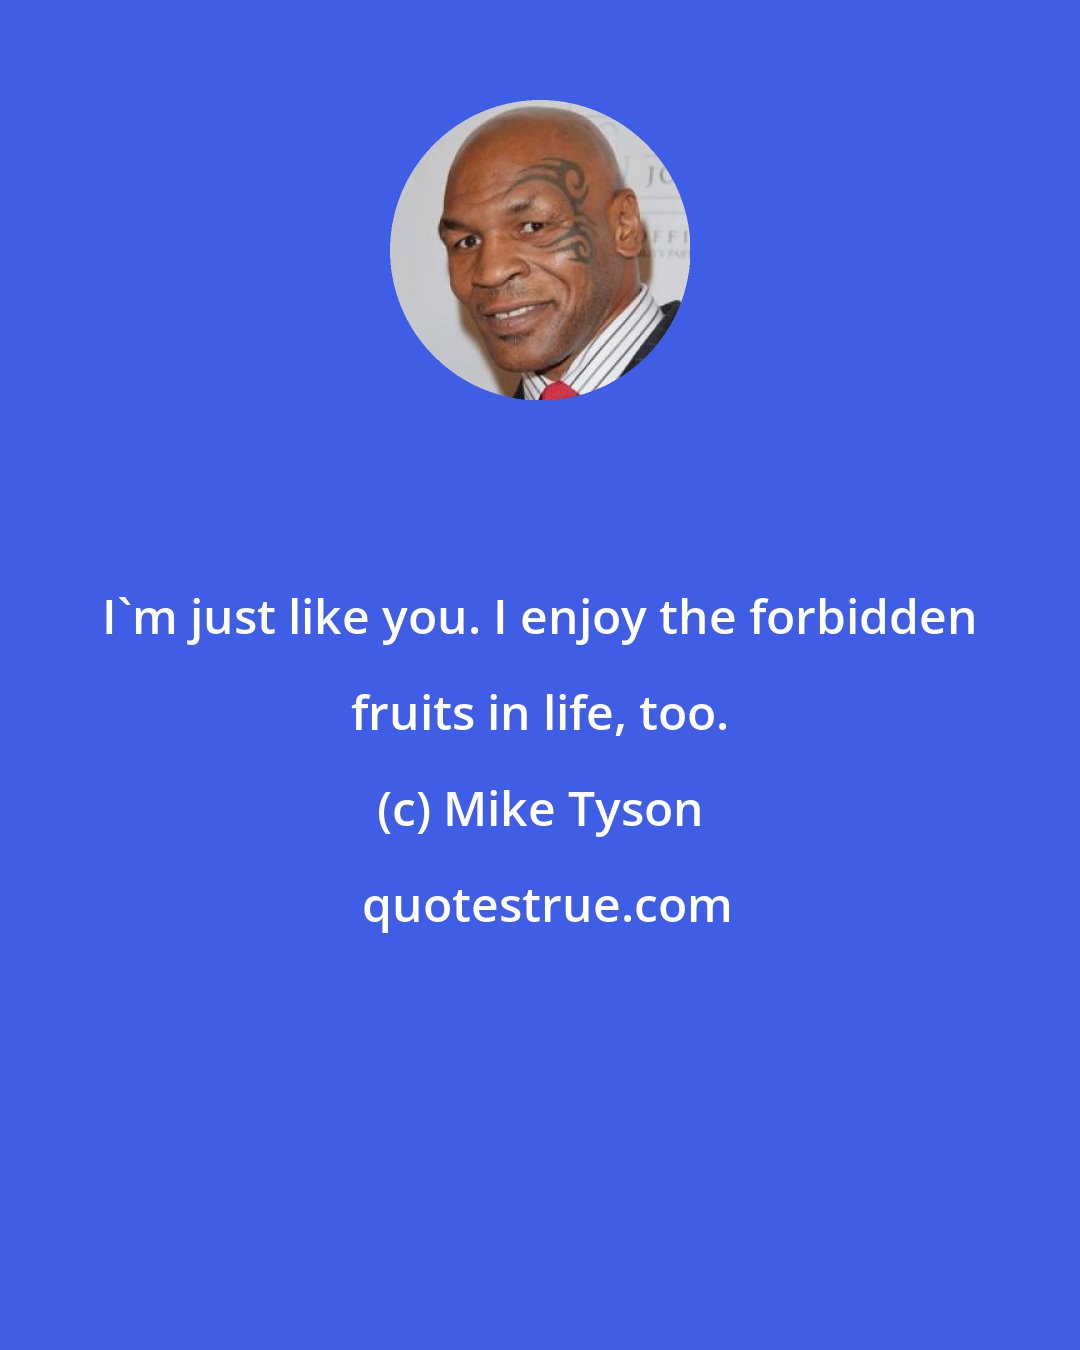 Mike Tyson: I'm just like you. I enjoy the forbidden fruits in life, too.